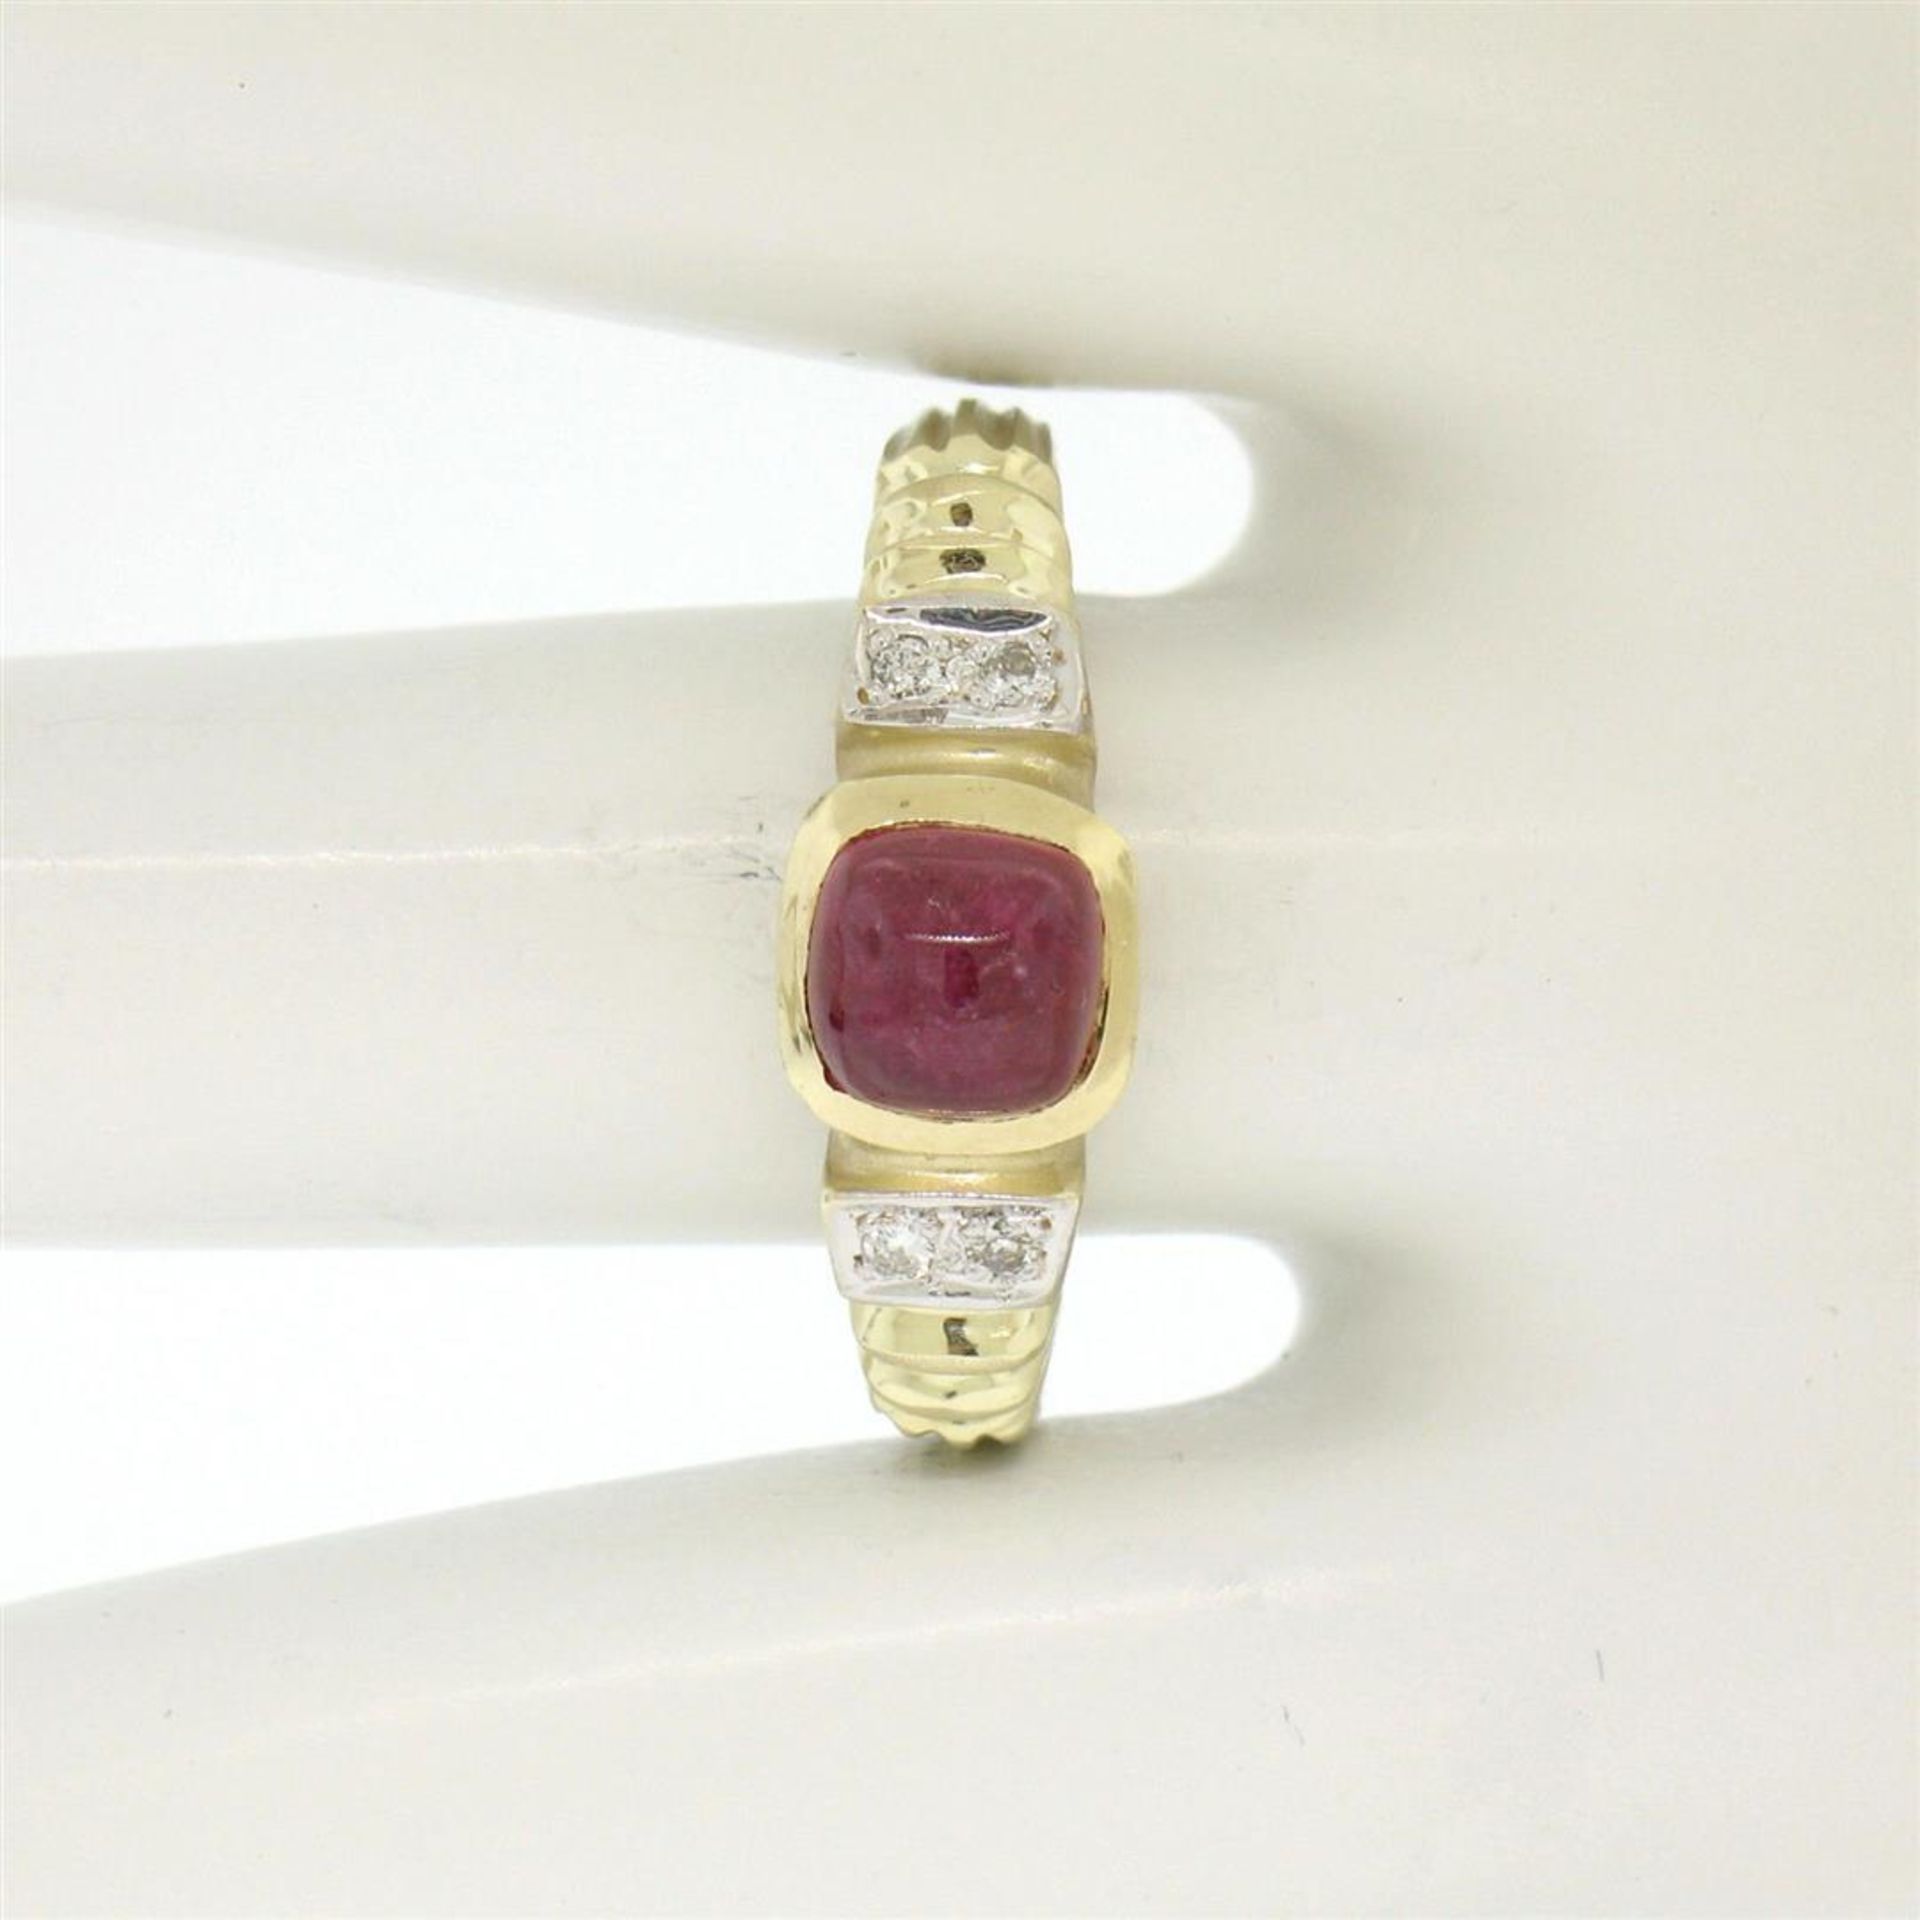 14k Yellow Gold 1.21 ctw Cabochon Ruby Solitaire Ring w/ 4 Diamond Accents - Image 6 of 6